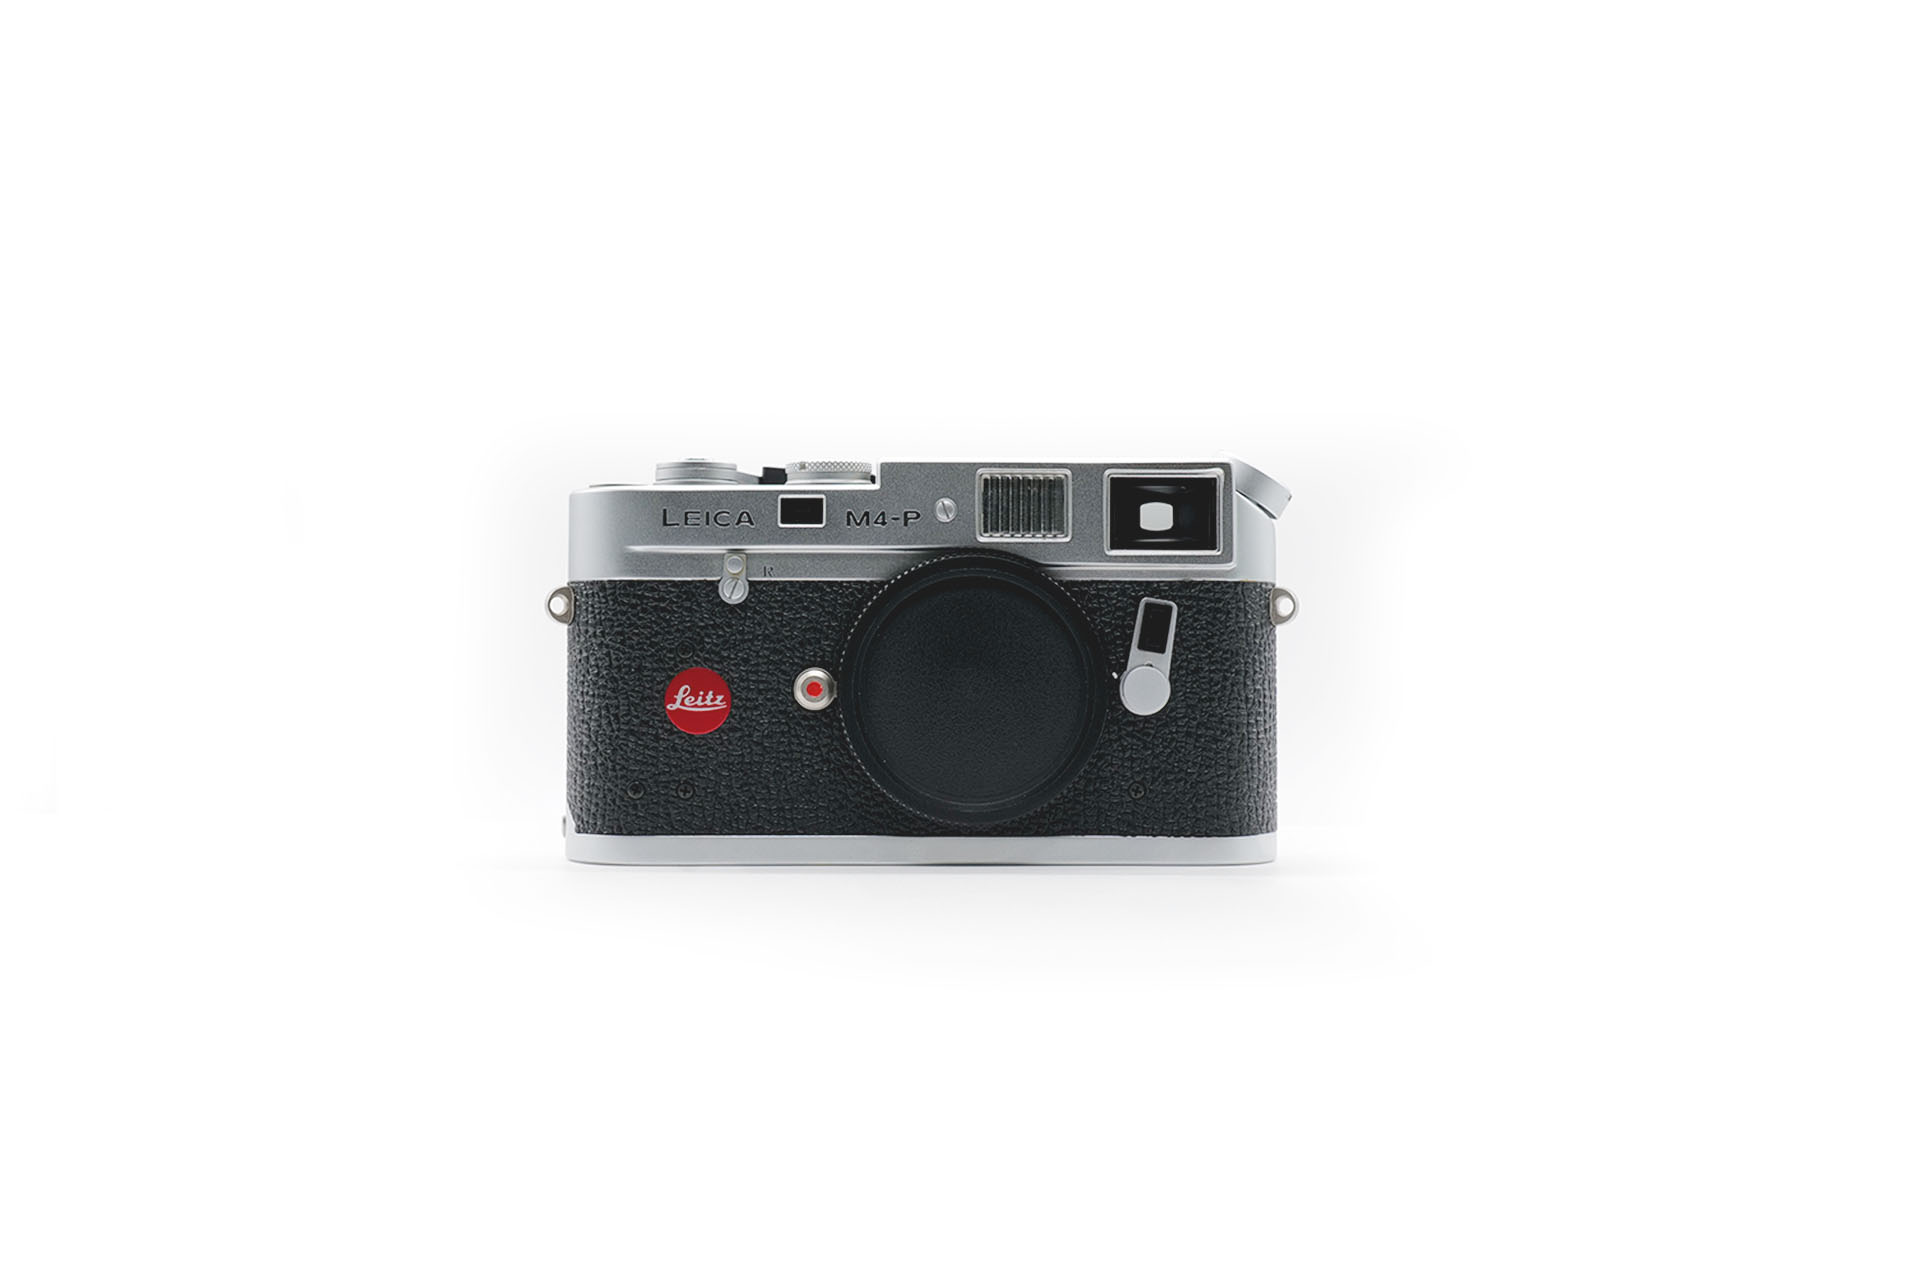 Leica M4-P special edition 1913-1983 CR (70th anniversary edition)